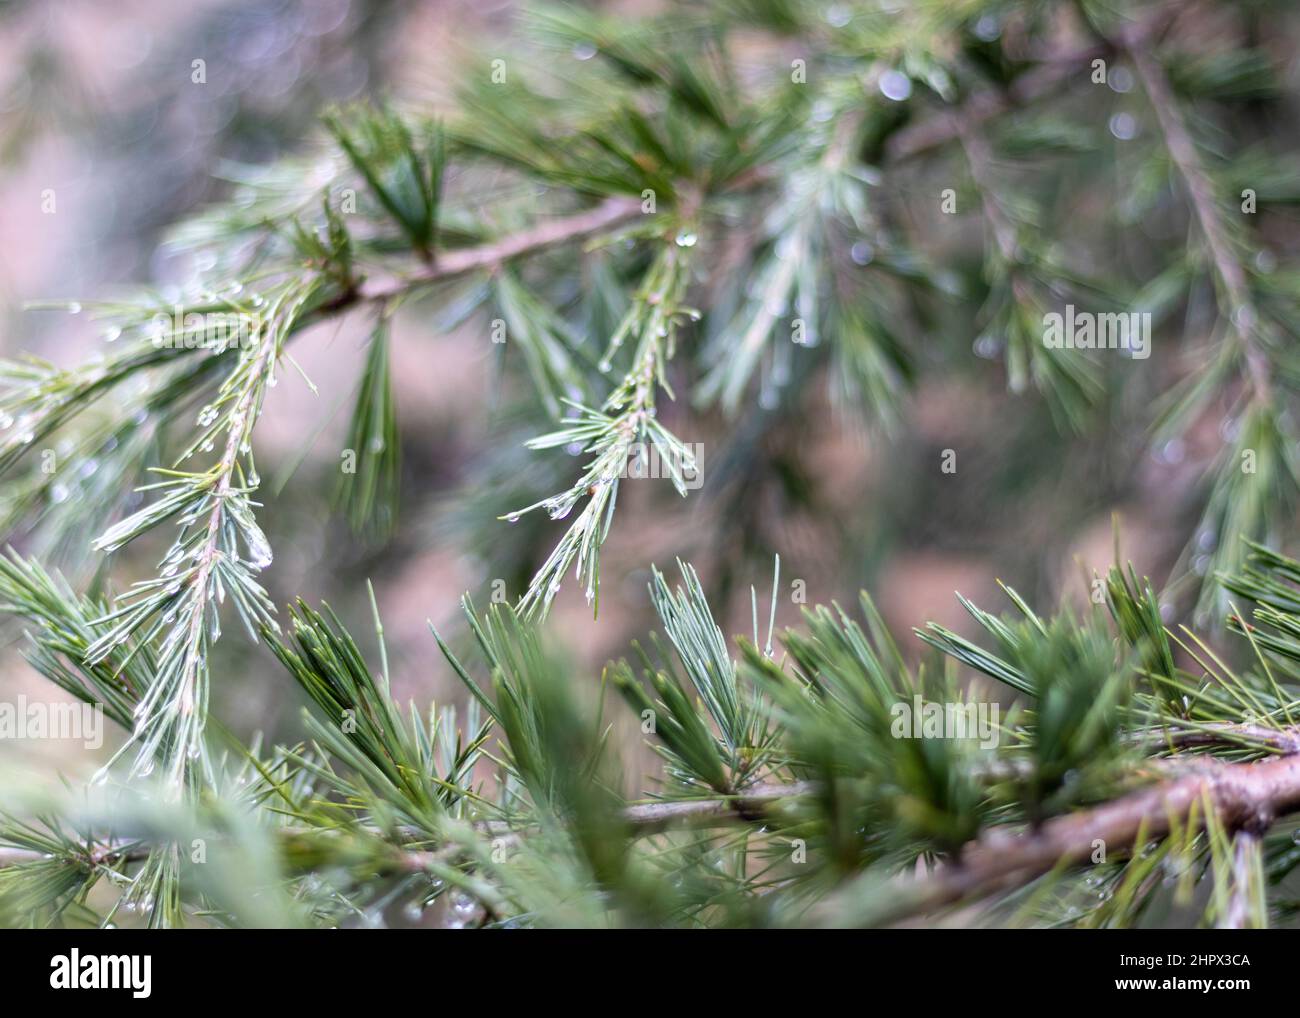 Cedar tree branches natural background Stock Photo